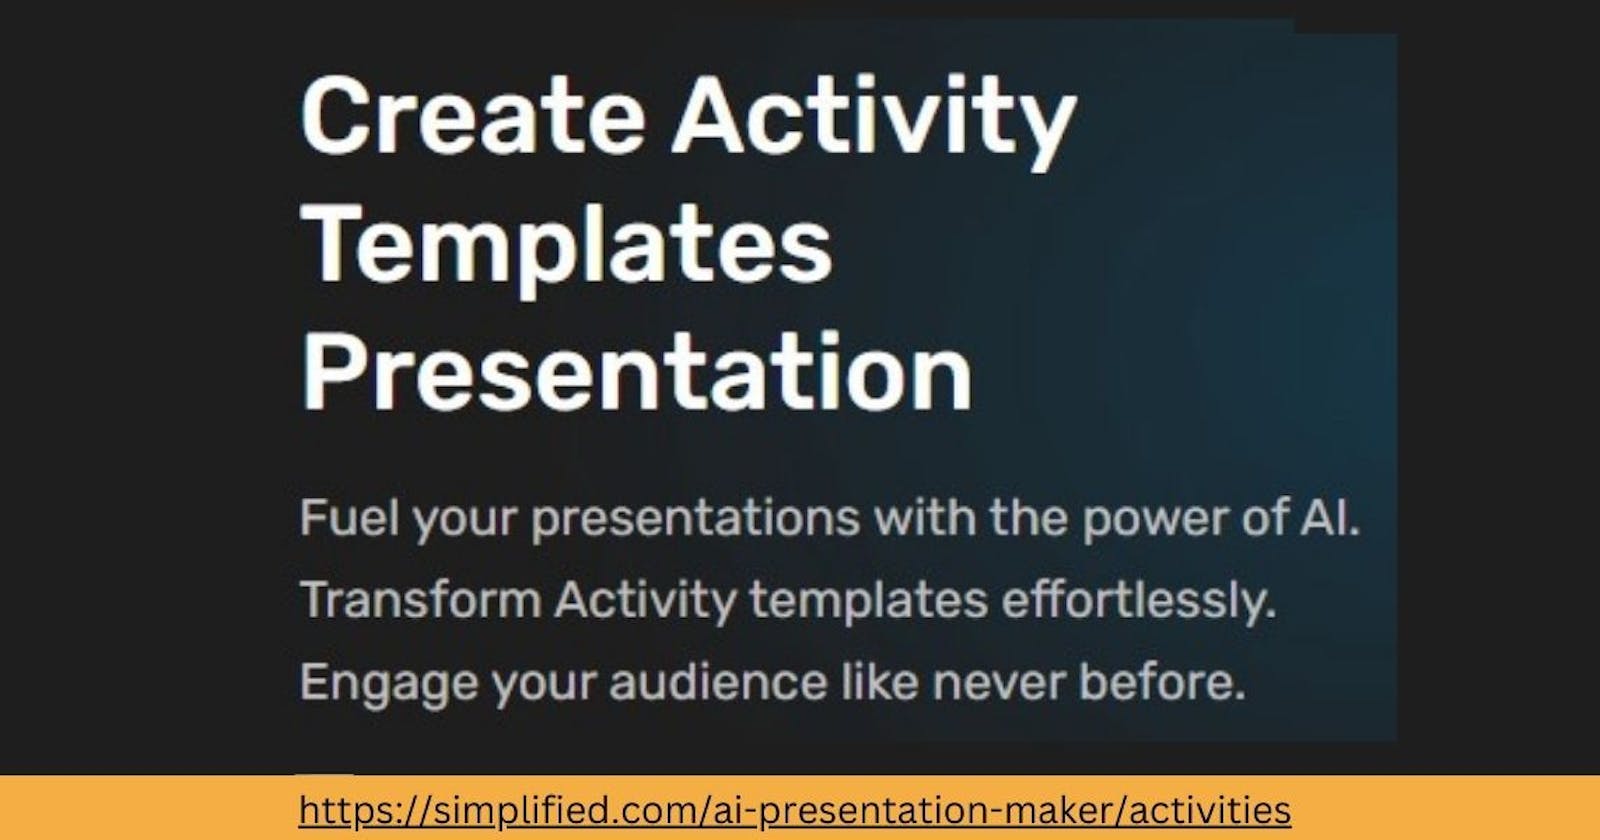 Create Dynamic Activity Templates Presentations Online: Simplified Presentation Tool